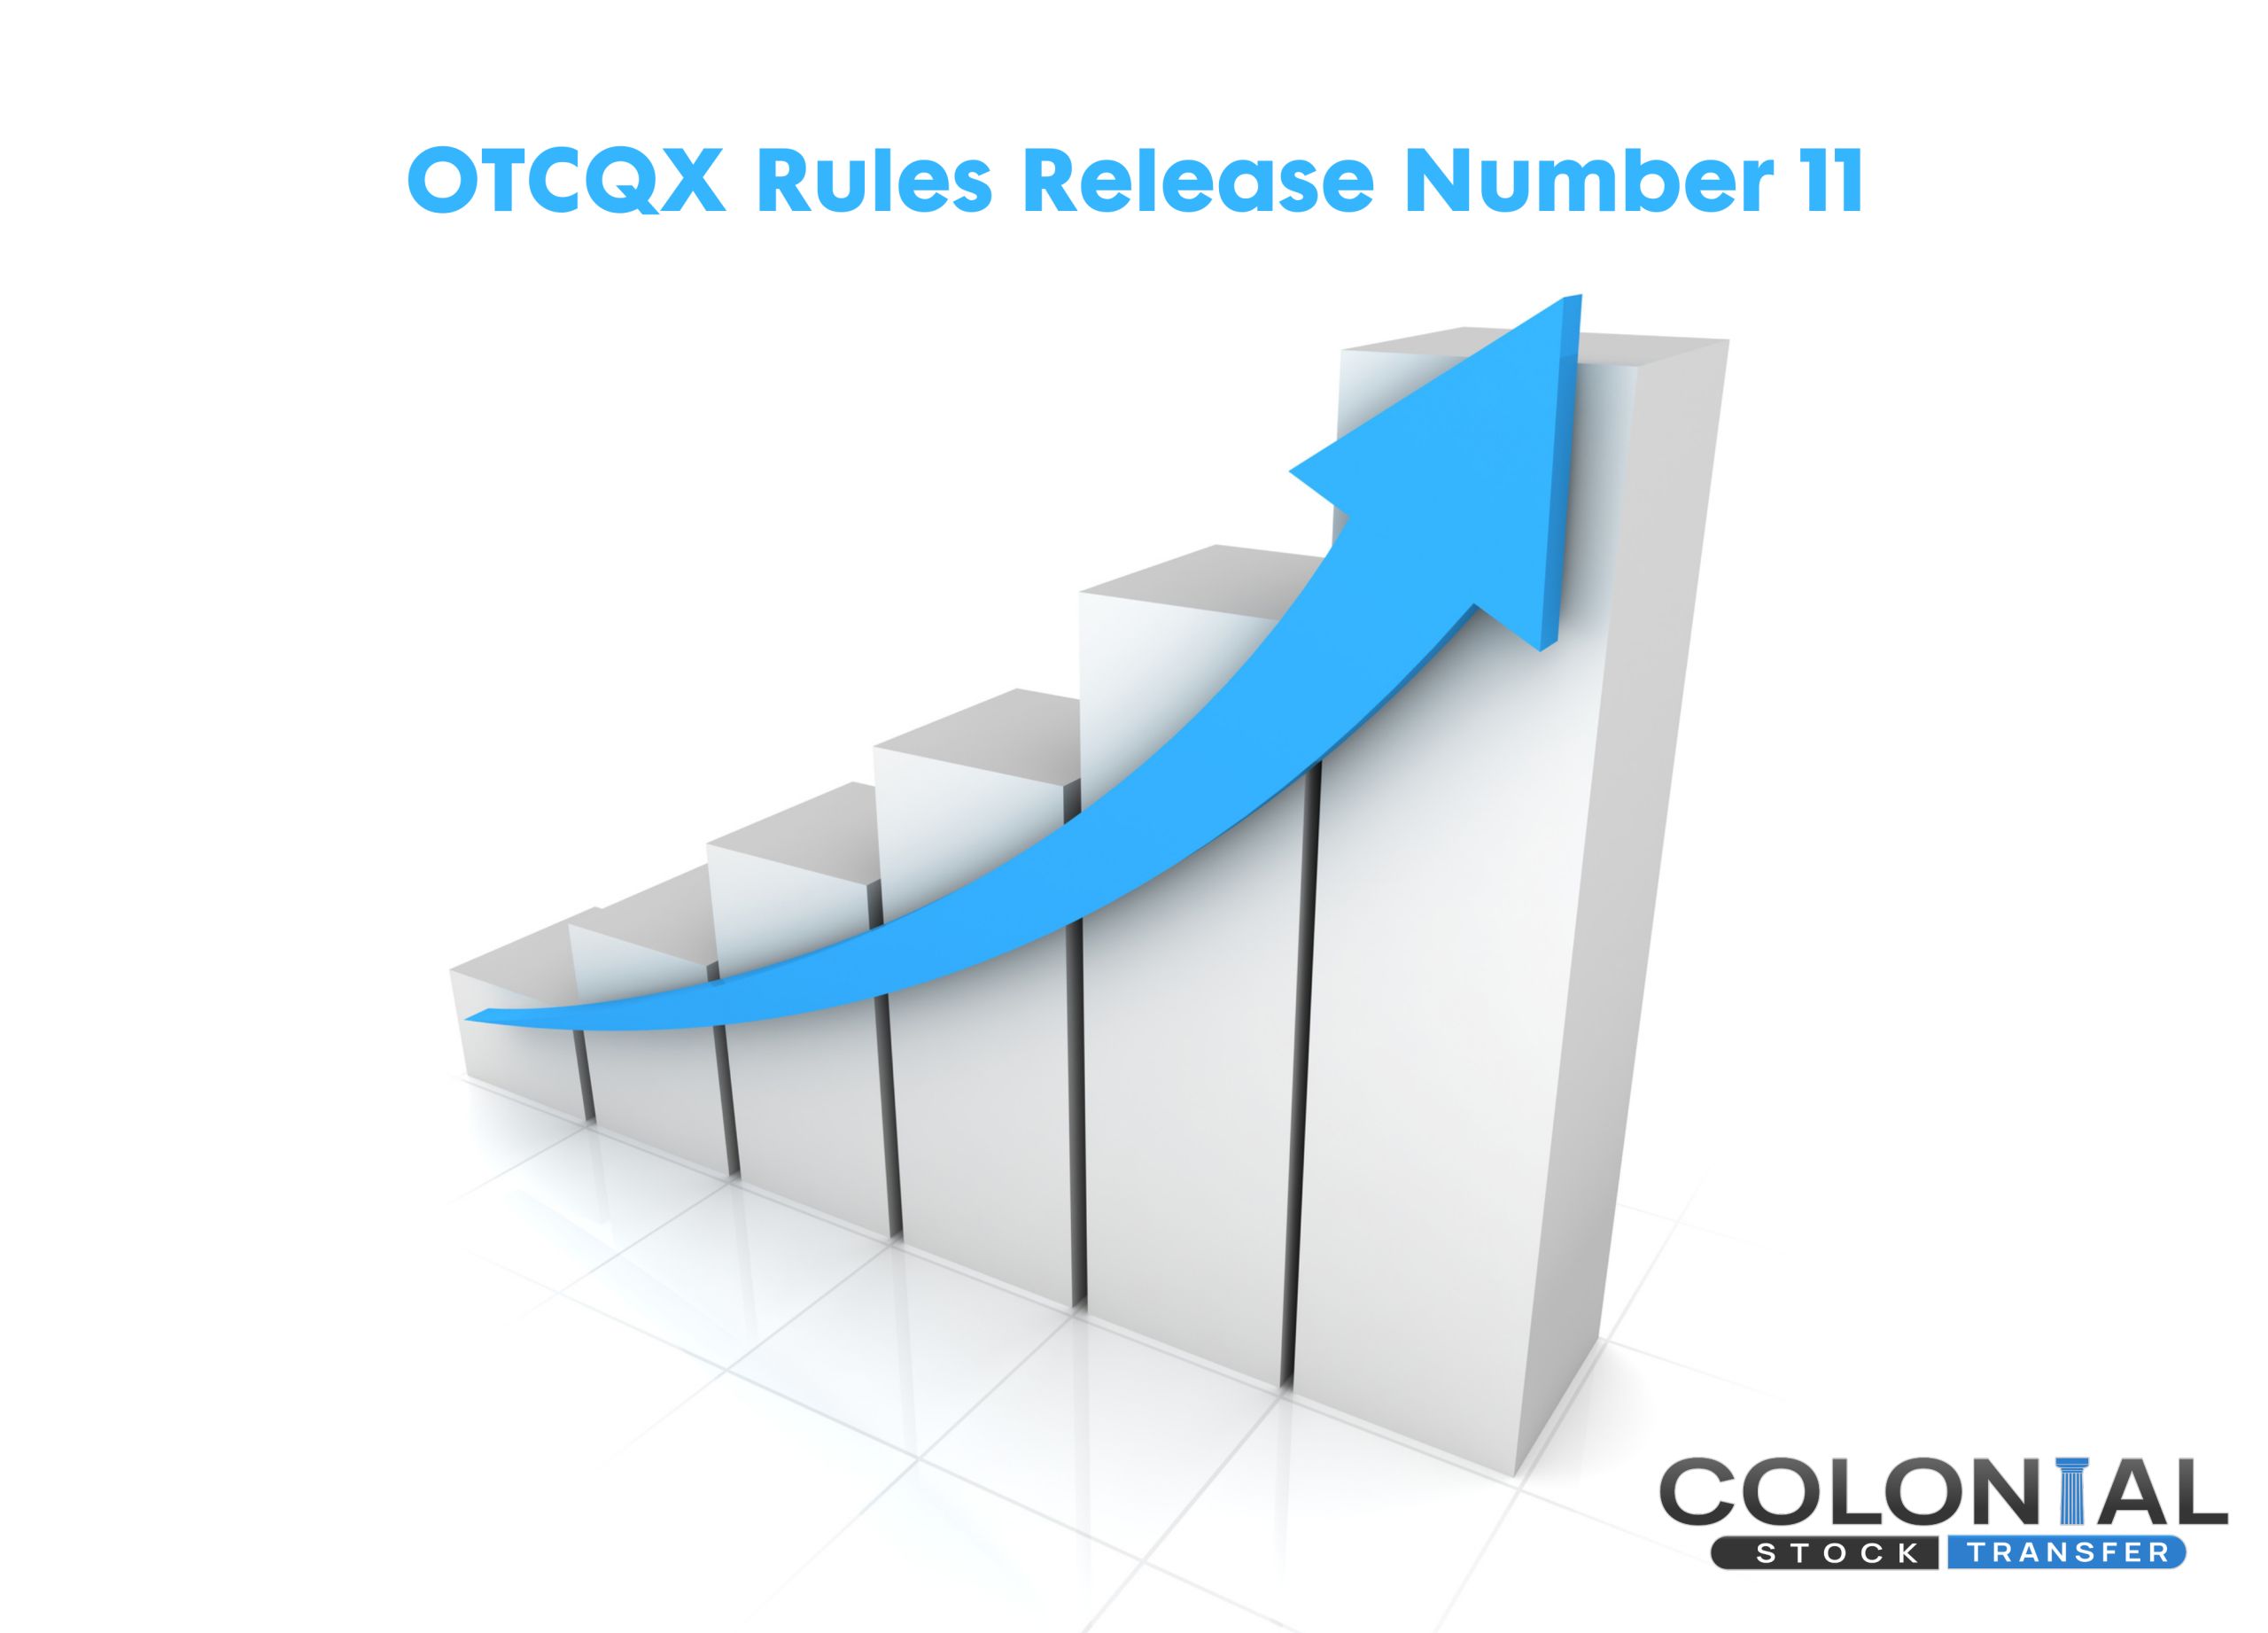 OTCQX Rules Release Number 11